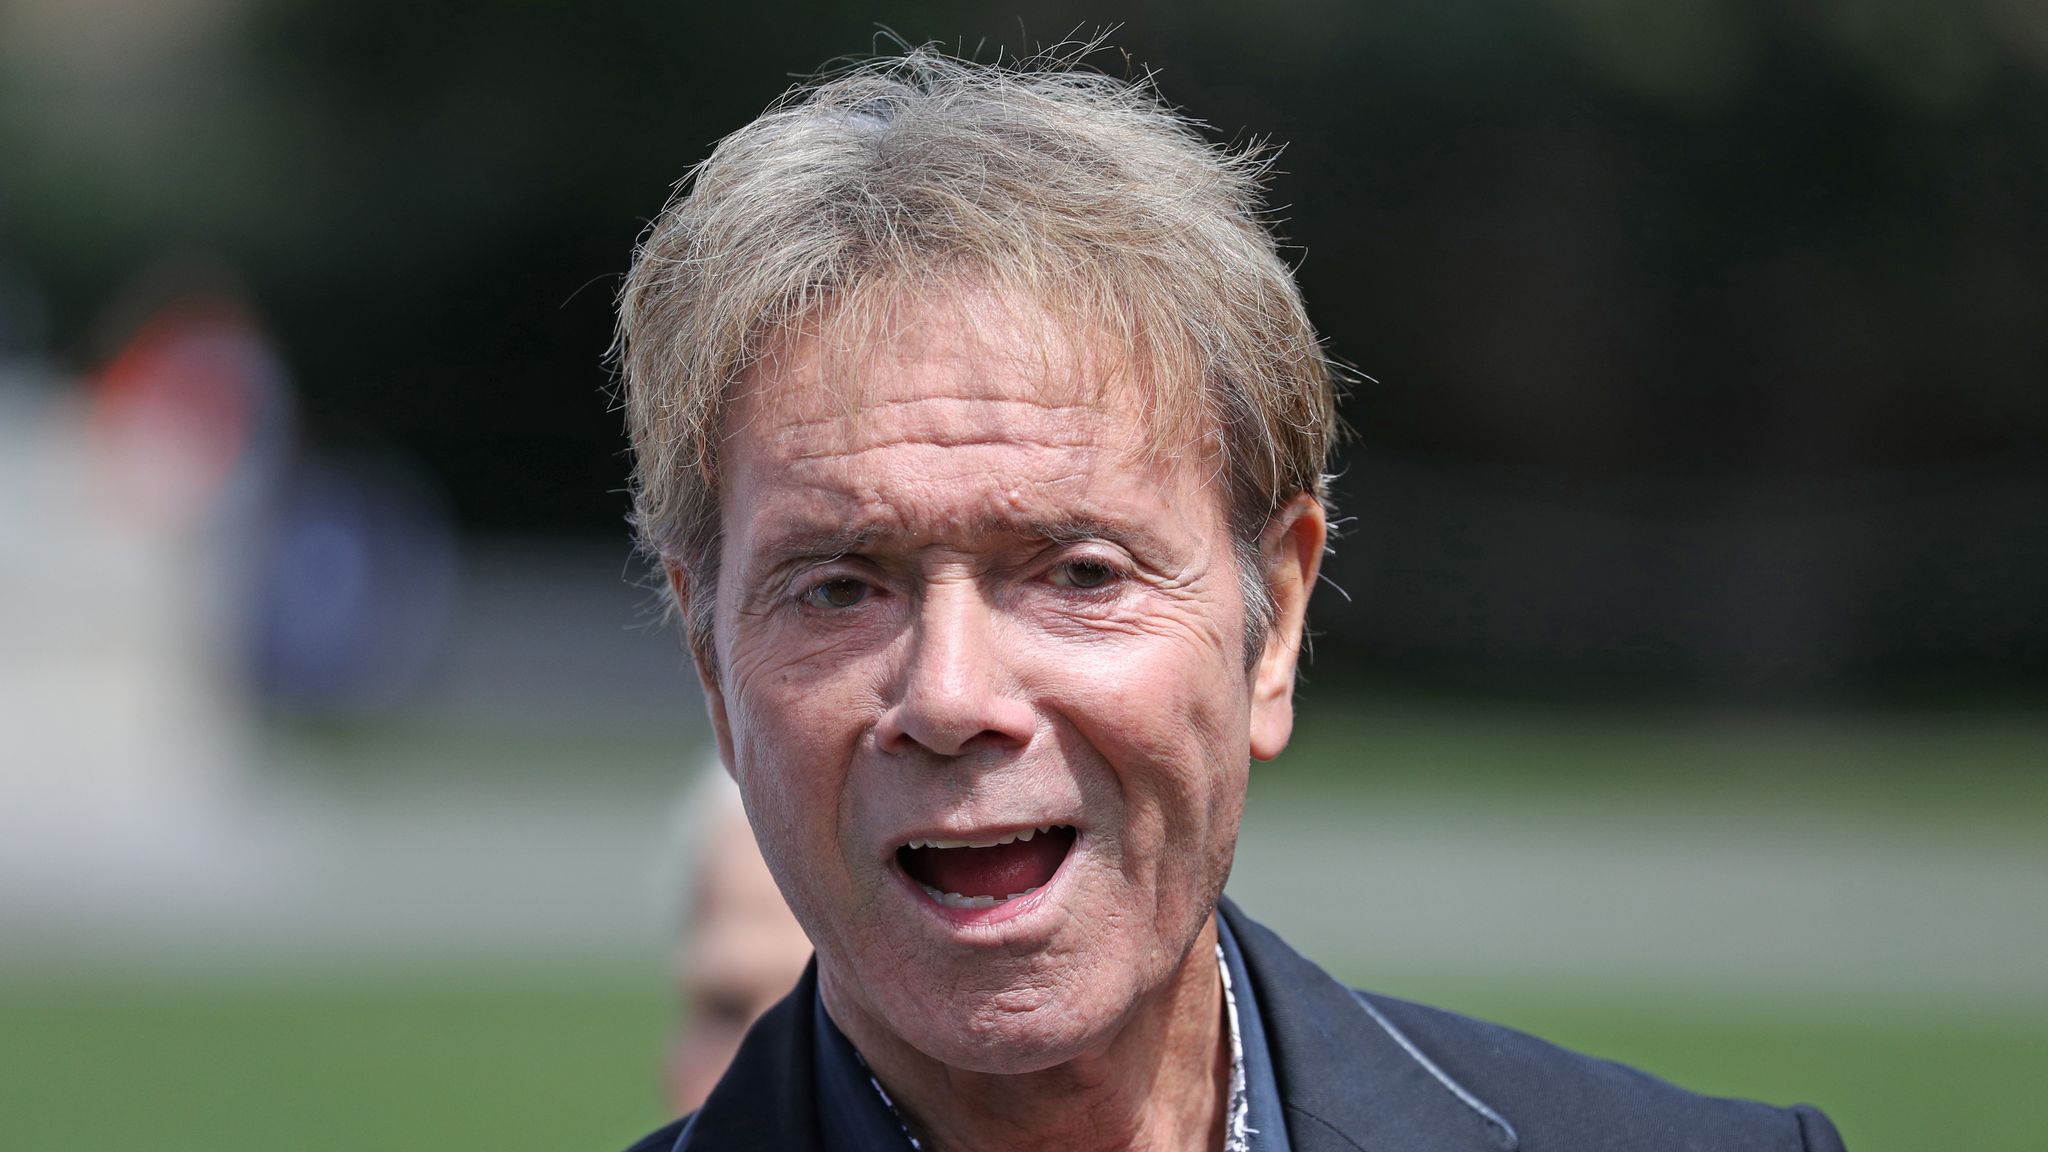 Sir Cliff Richard People still think no smoke without fire over